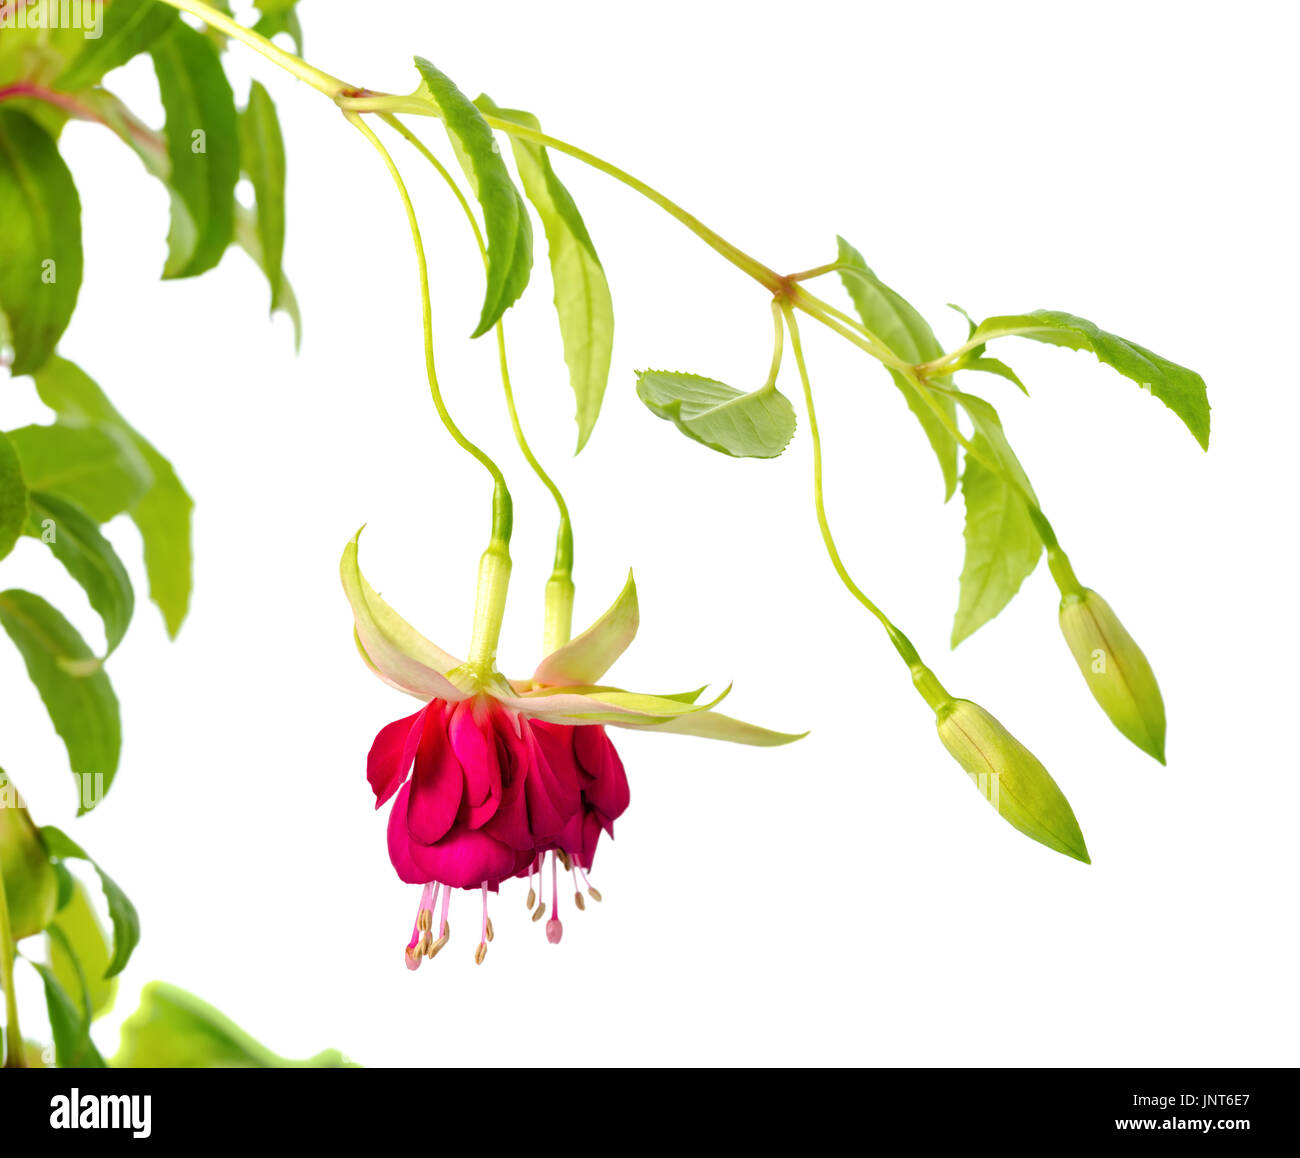 blooming hanging twig in shades of dark red and white fuchsia is isolated on background, Mood Indigo, close up Stock Photo